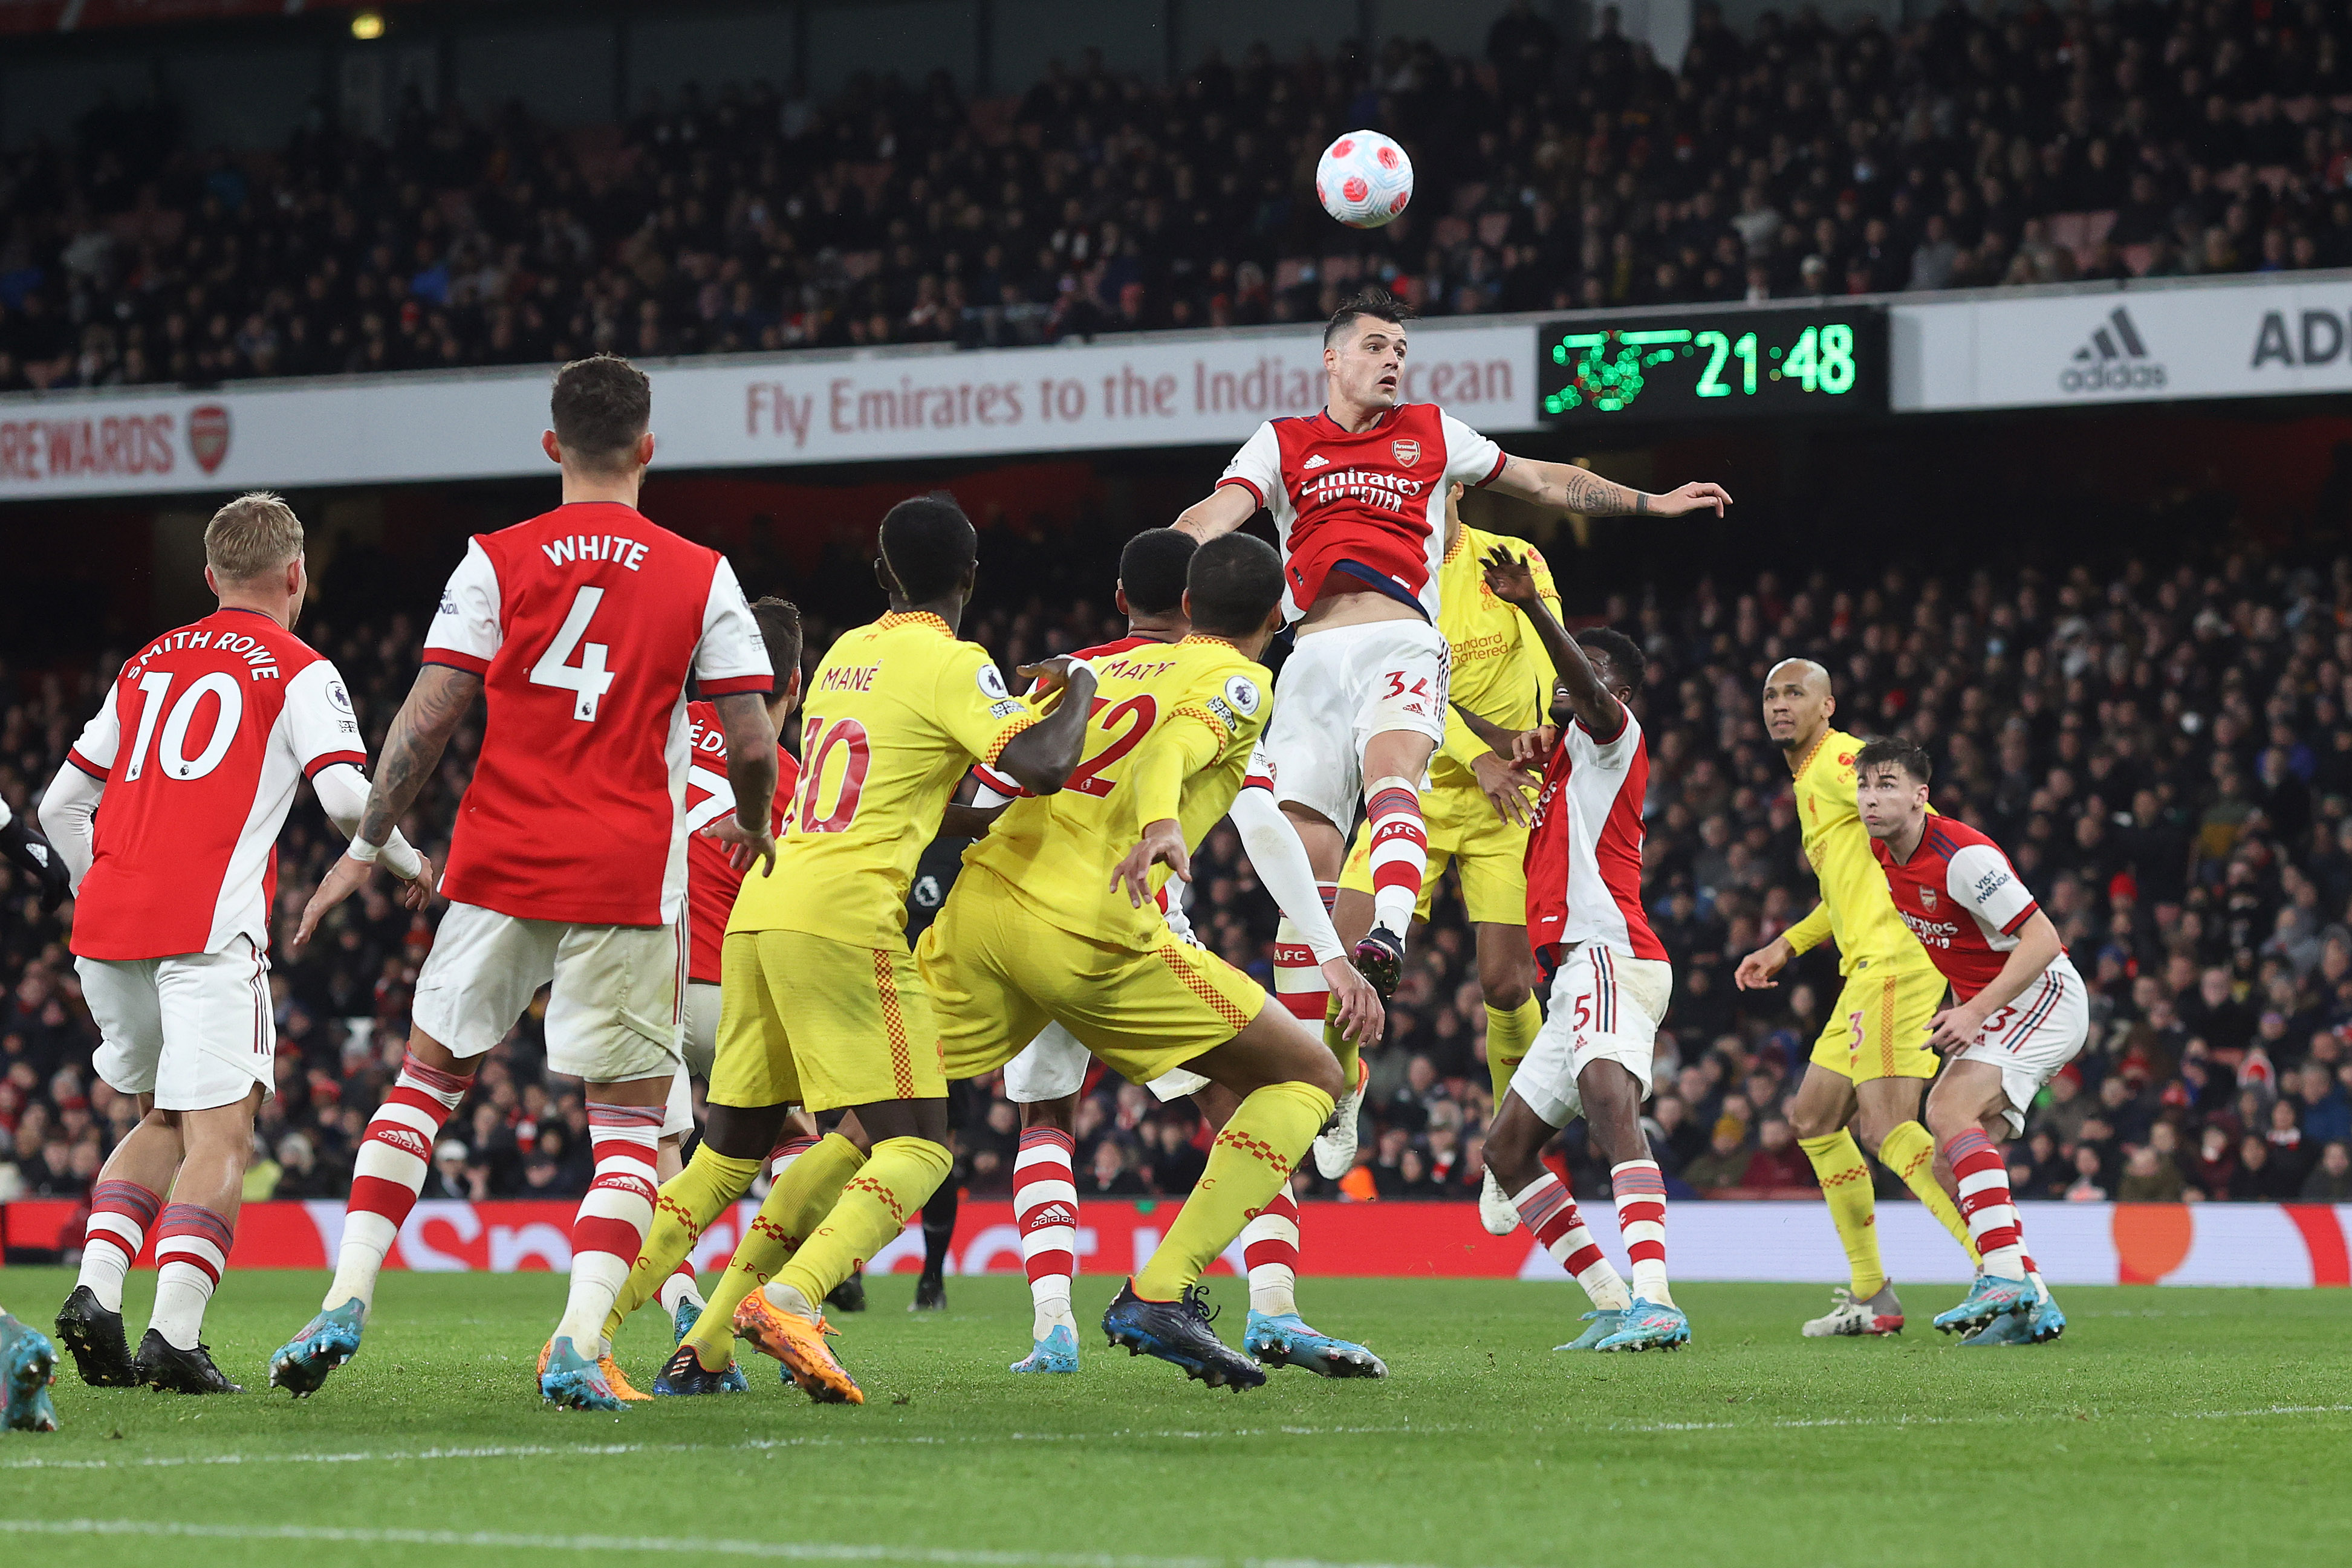 Arsenal moving in right direction despite Liverpool defeat